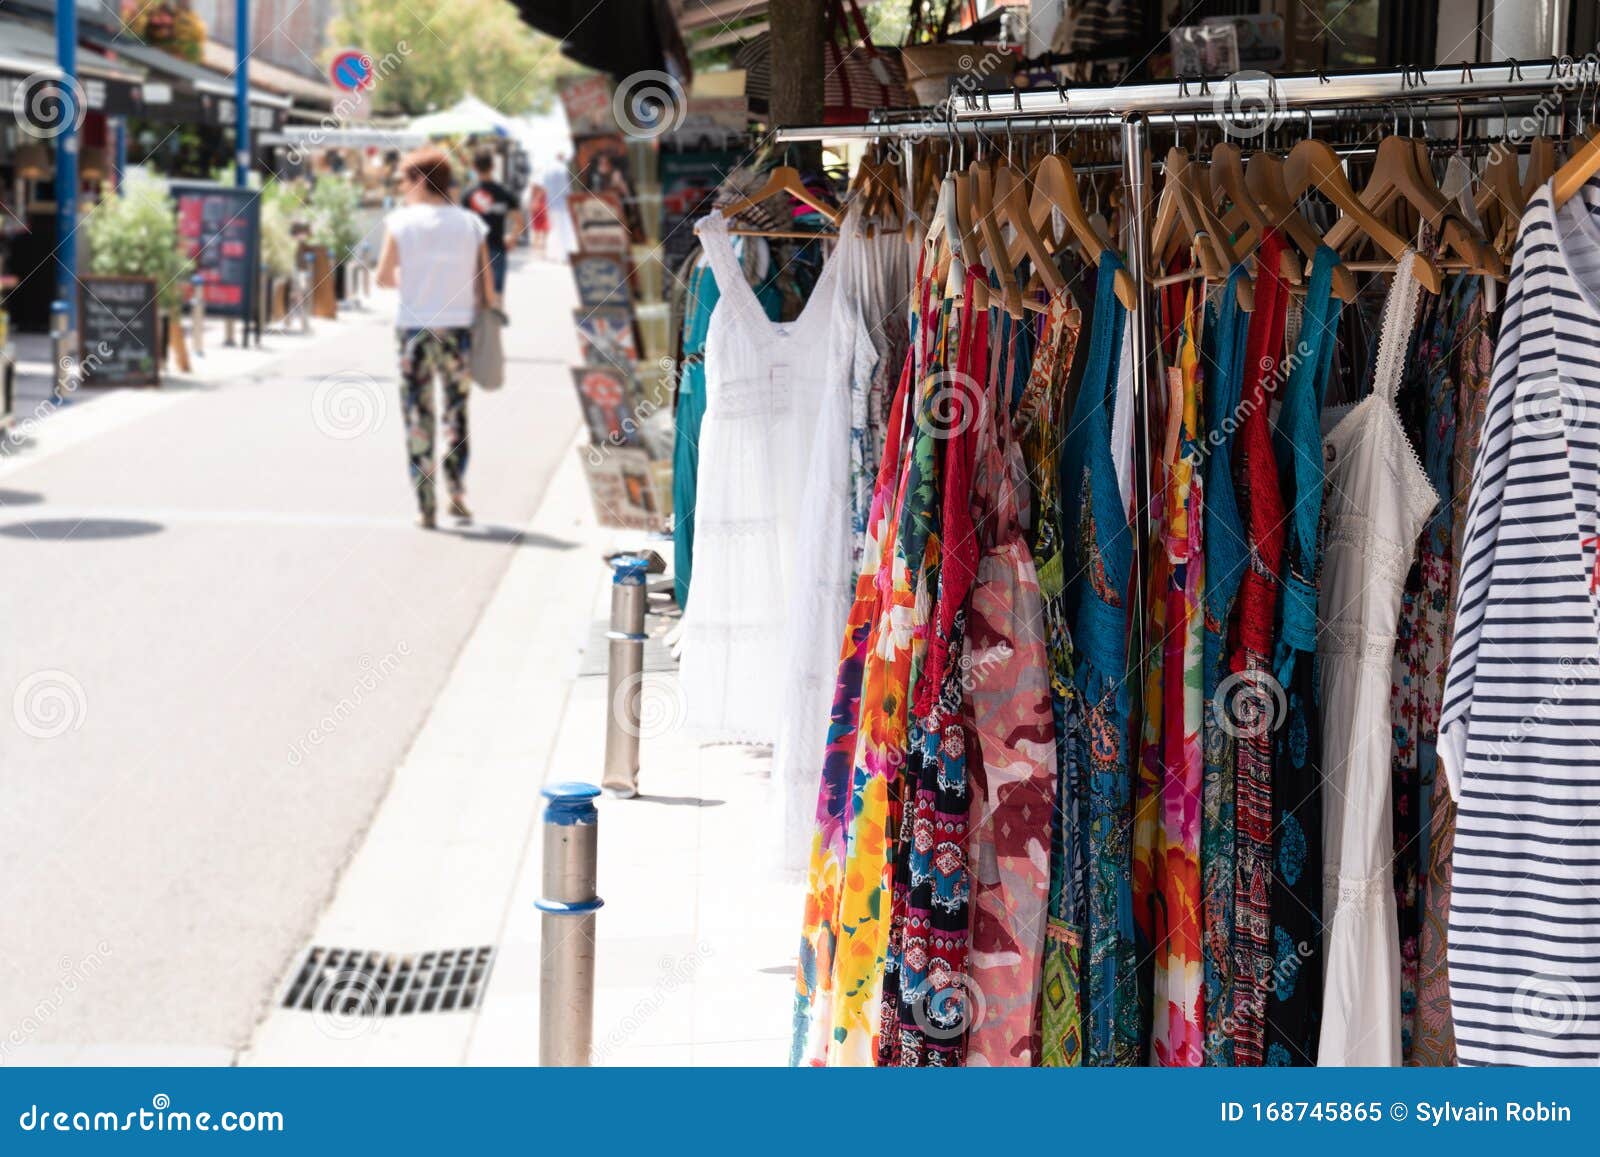 Racks with Clothes Street Shop Outdoors Store Sells Clothes in City ...